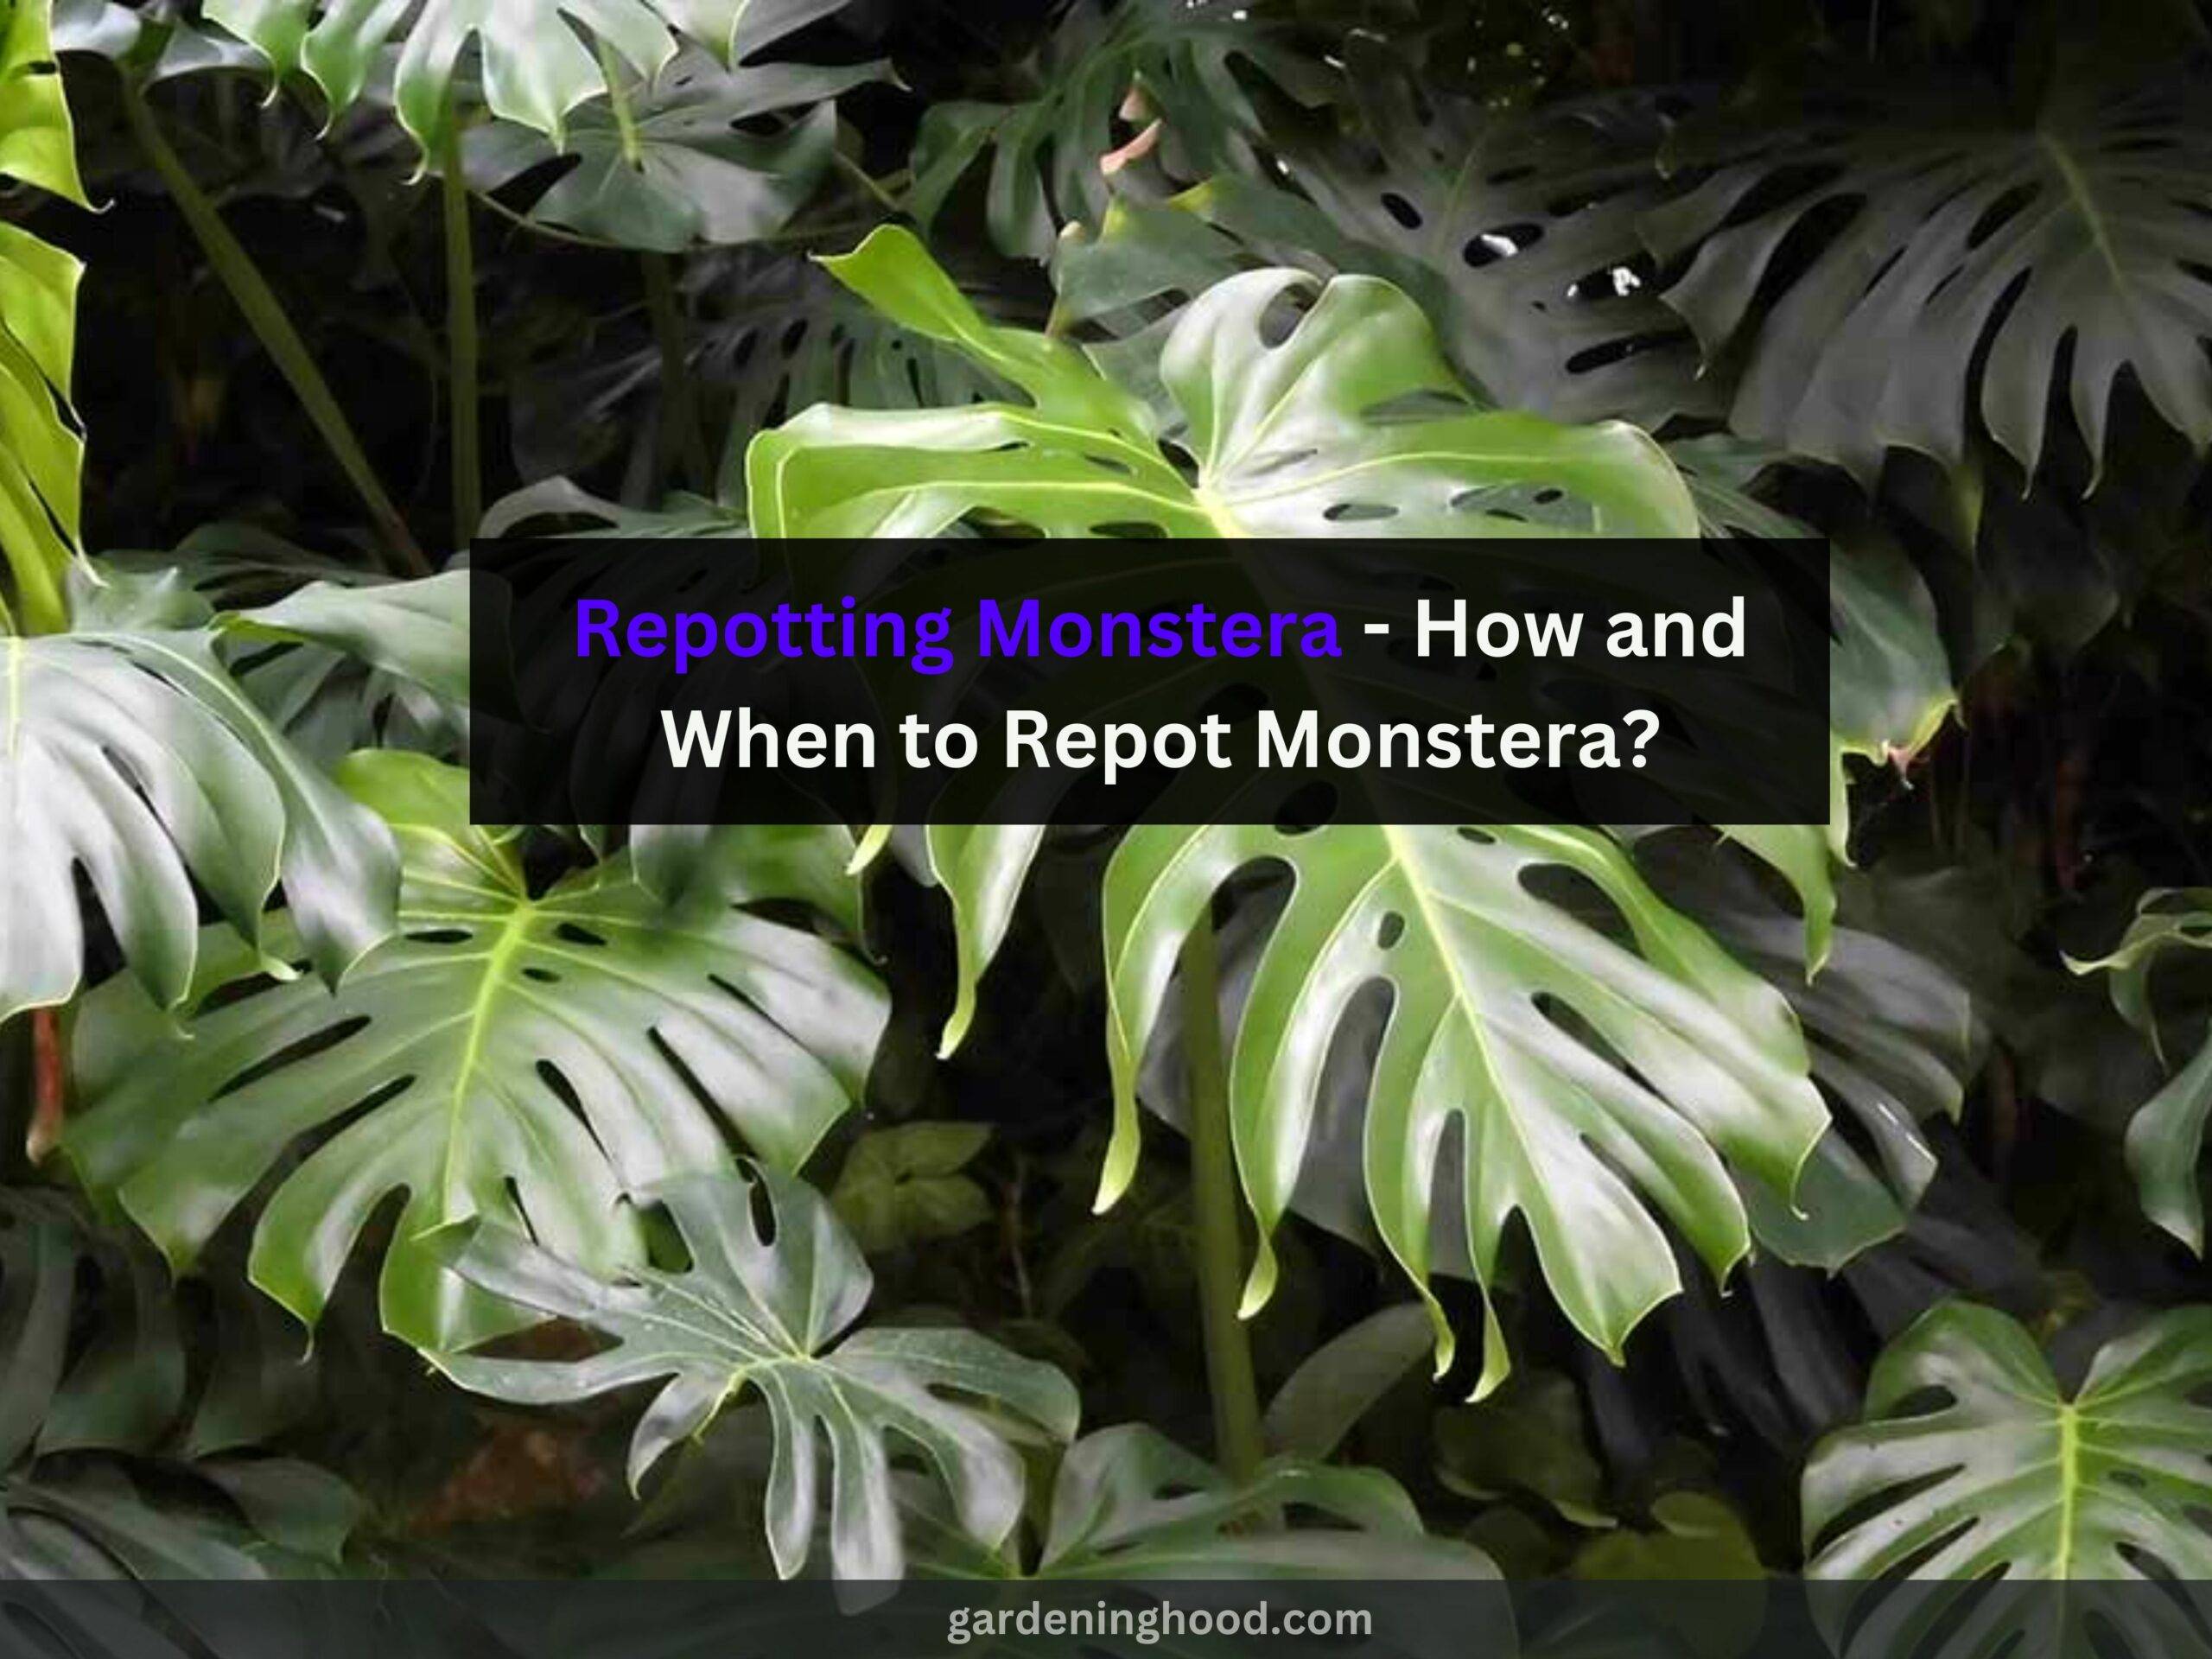 Repotting Monstera - How and When to Repot Monstera?